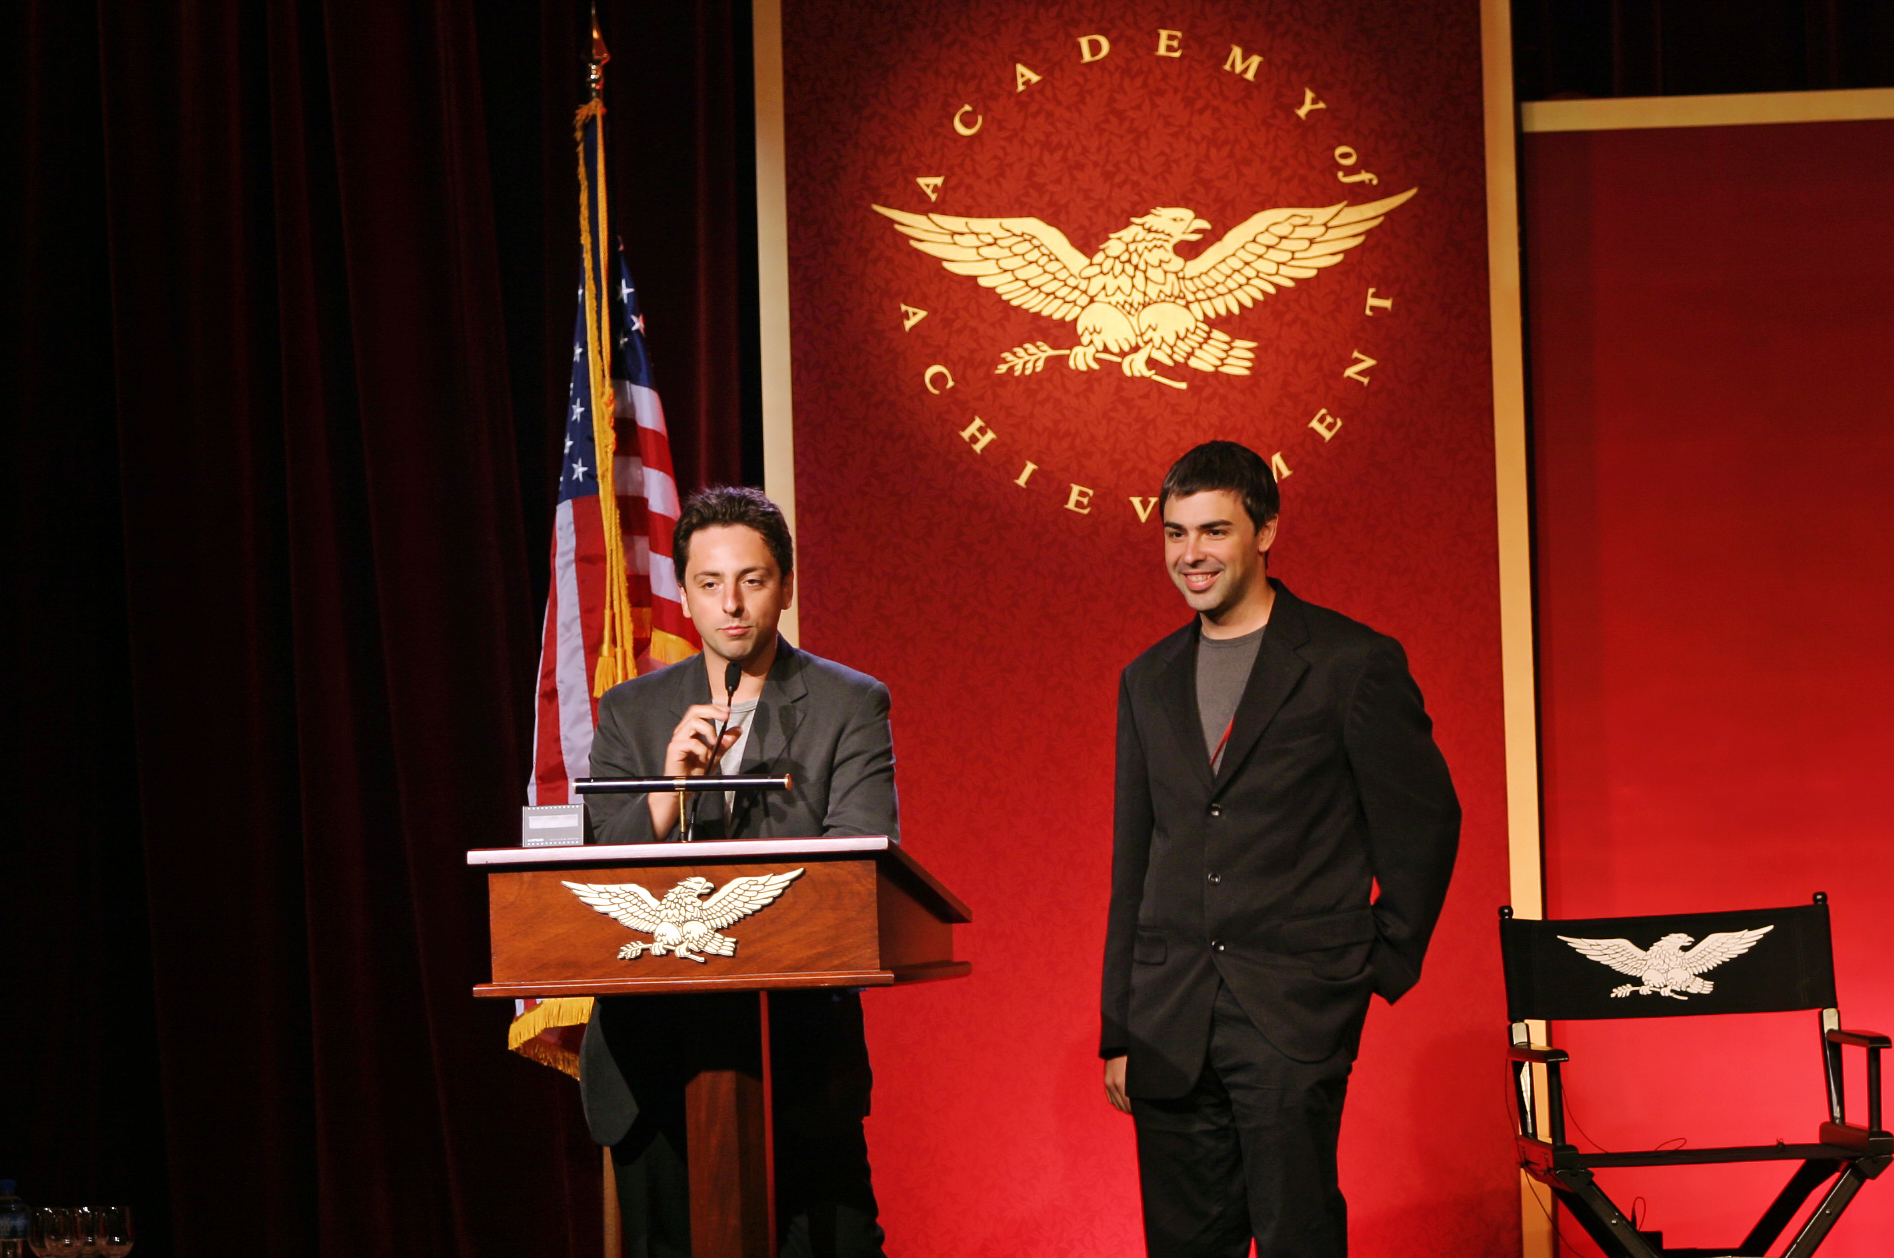 Google co-founders Sergey Brin and Larry Page, former Academy student delegates, return as 2004 Honorees.